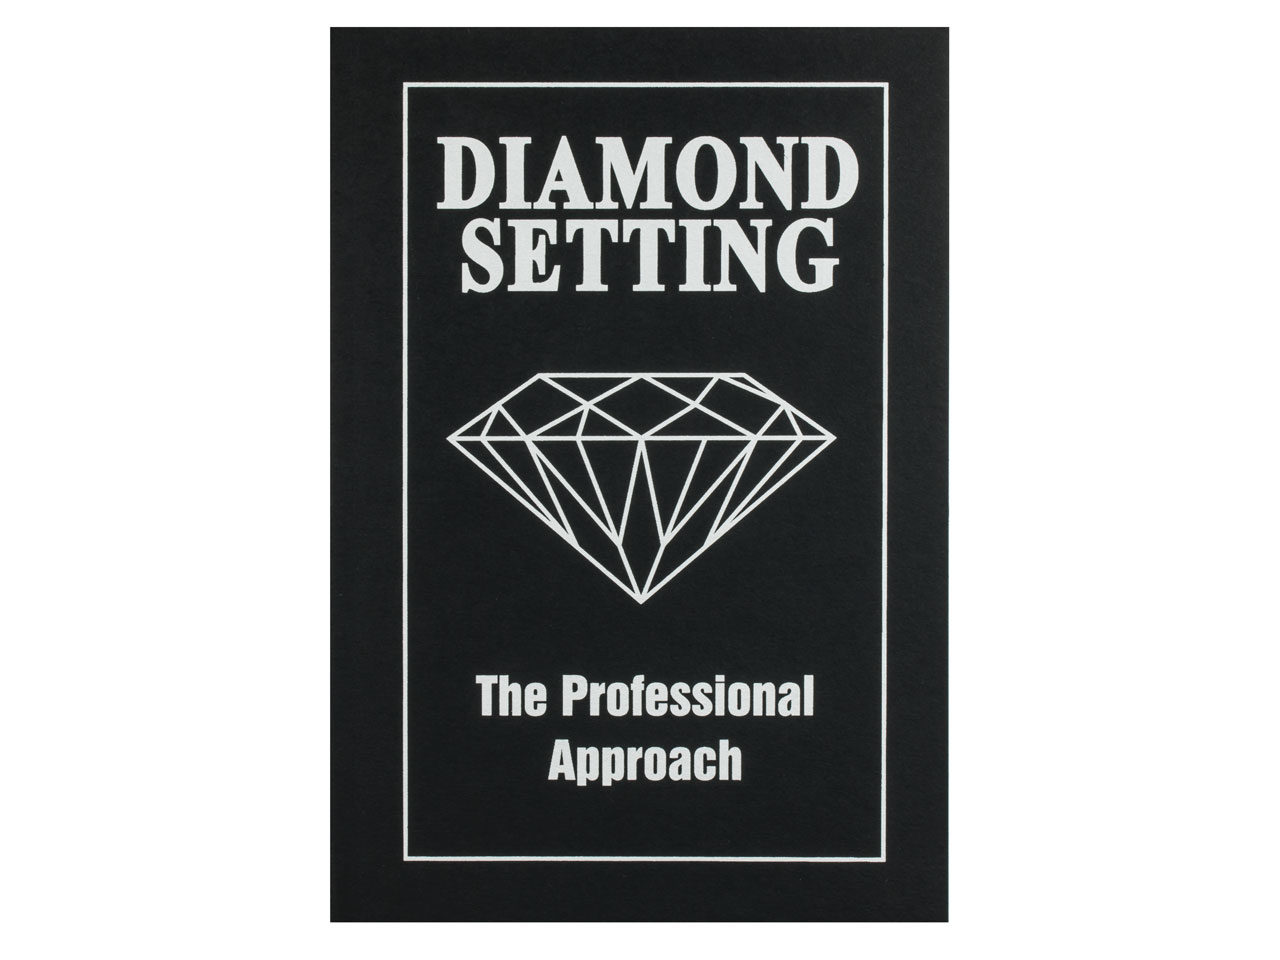 Diamond Setting The Professional   Approach By Robert R Wooding - Standard Image - 1